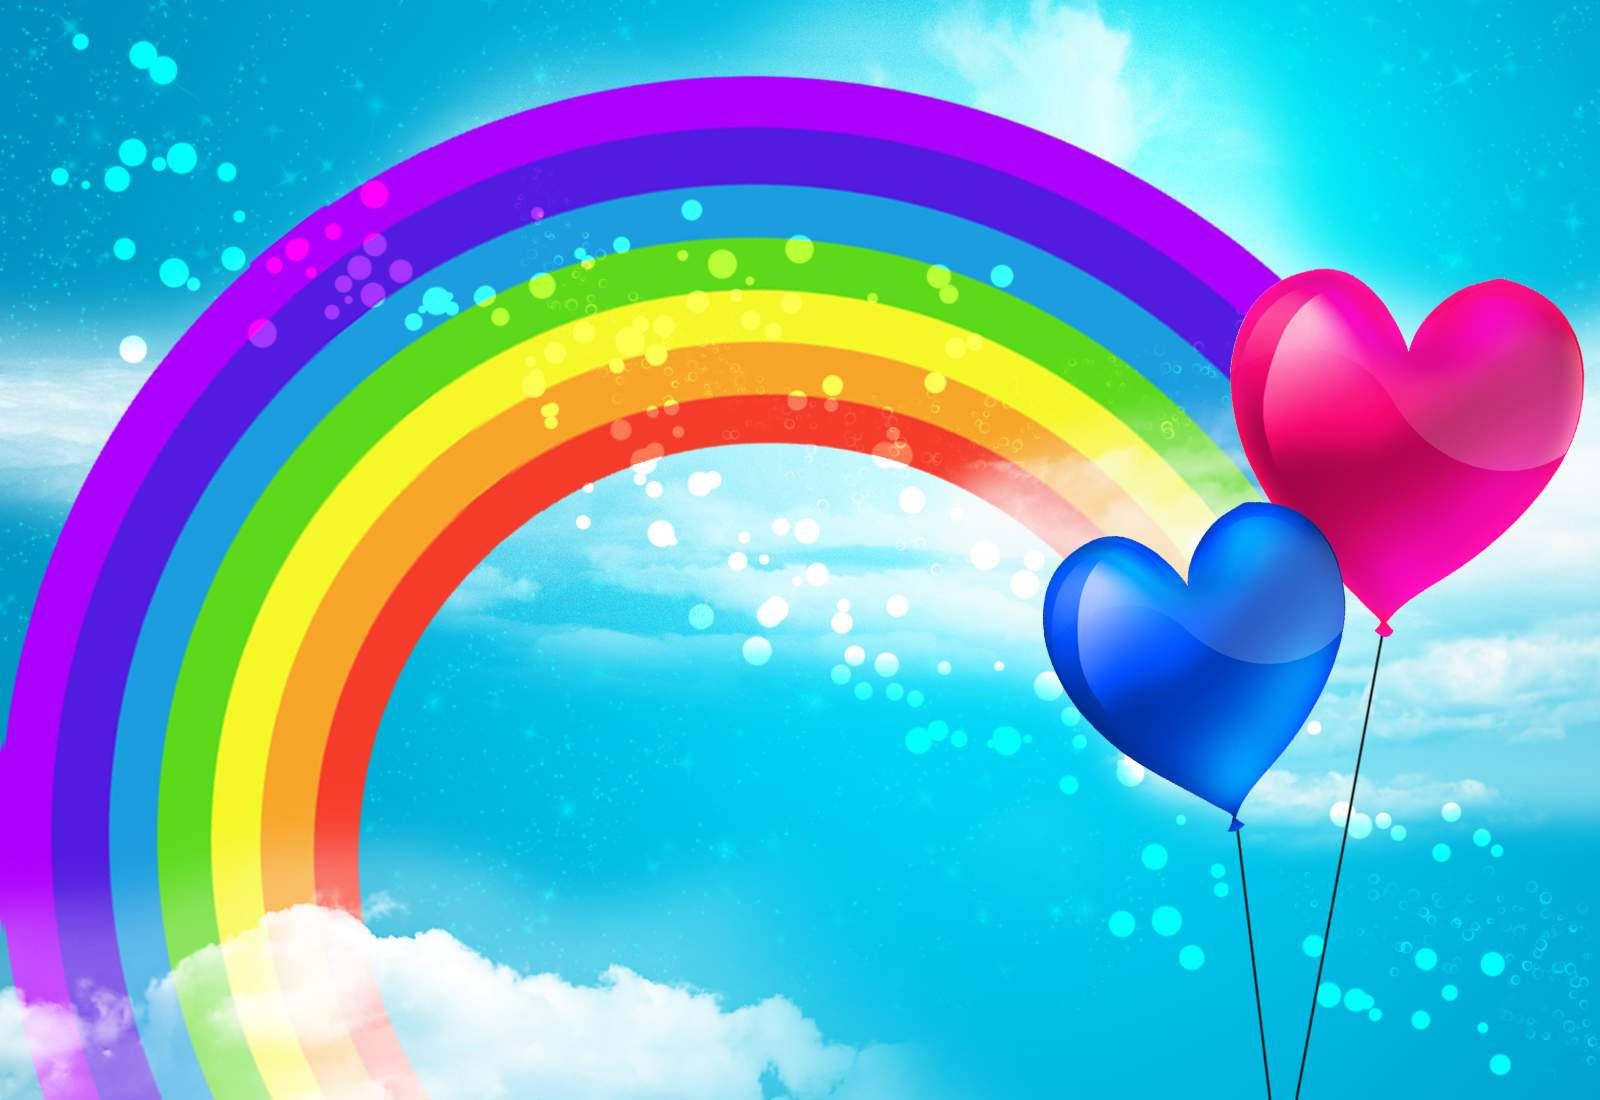 Rainbow 1600X1100 Wallpaper and Background Image